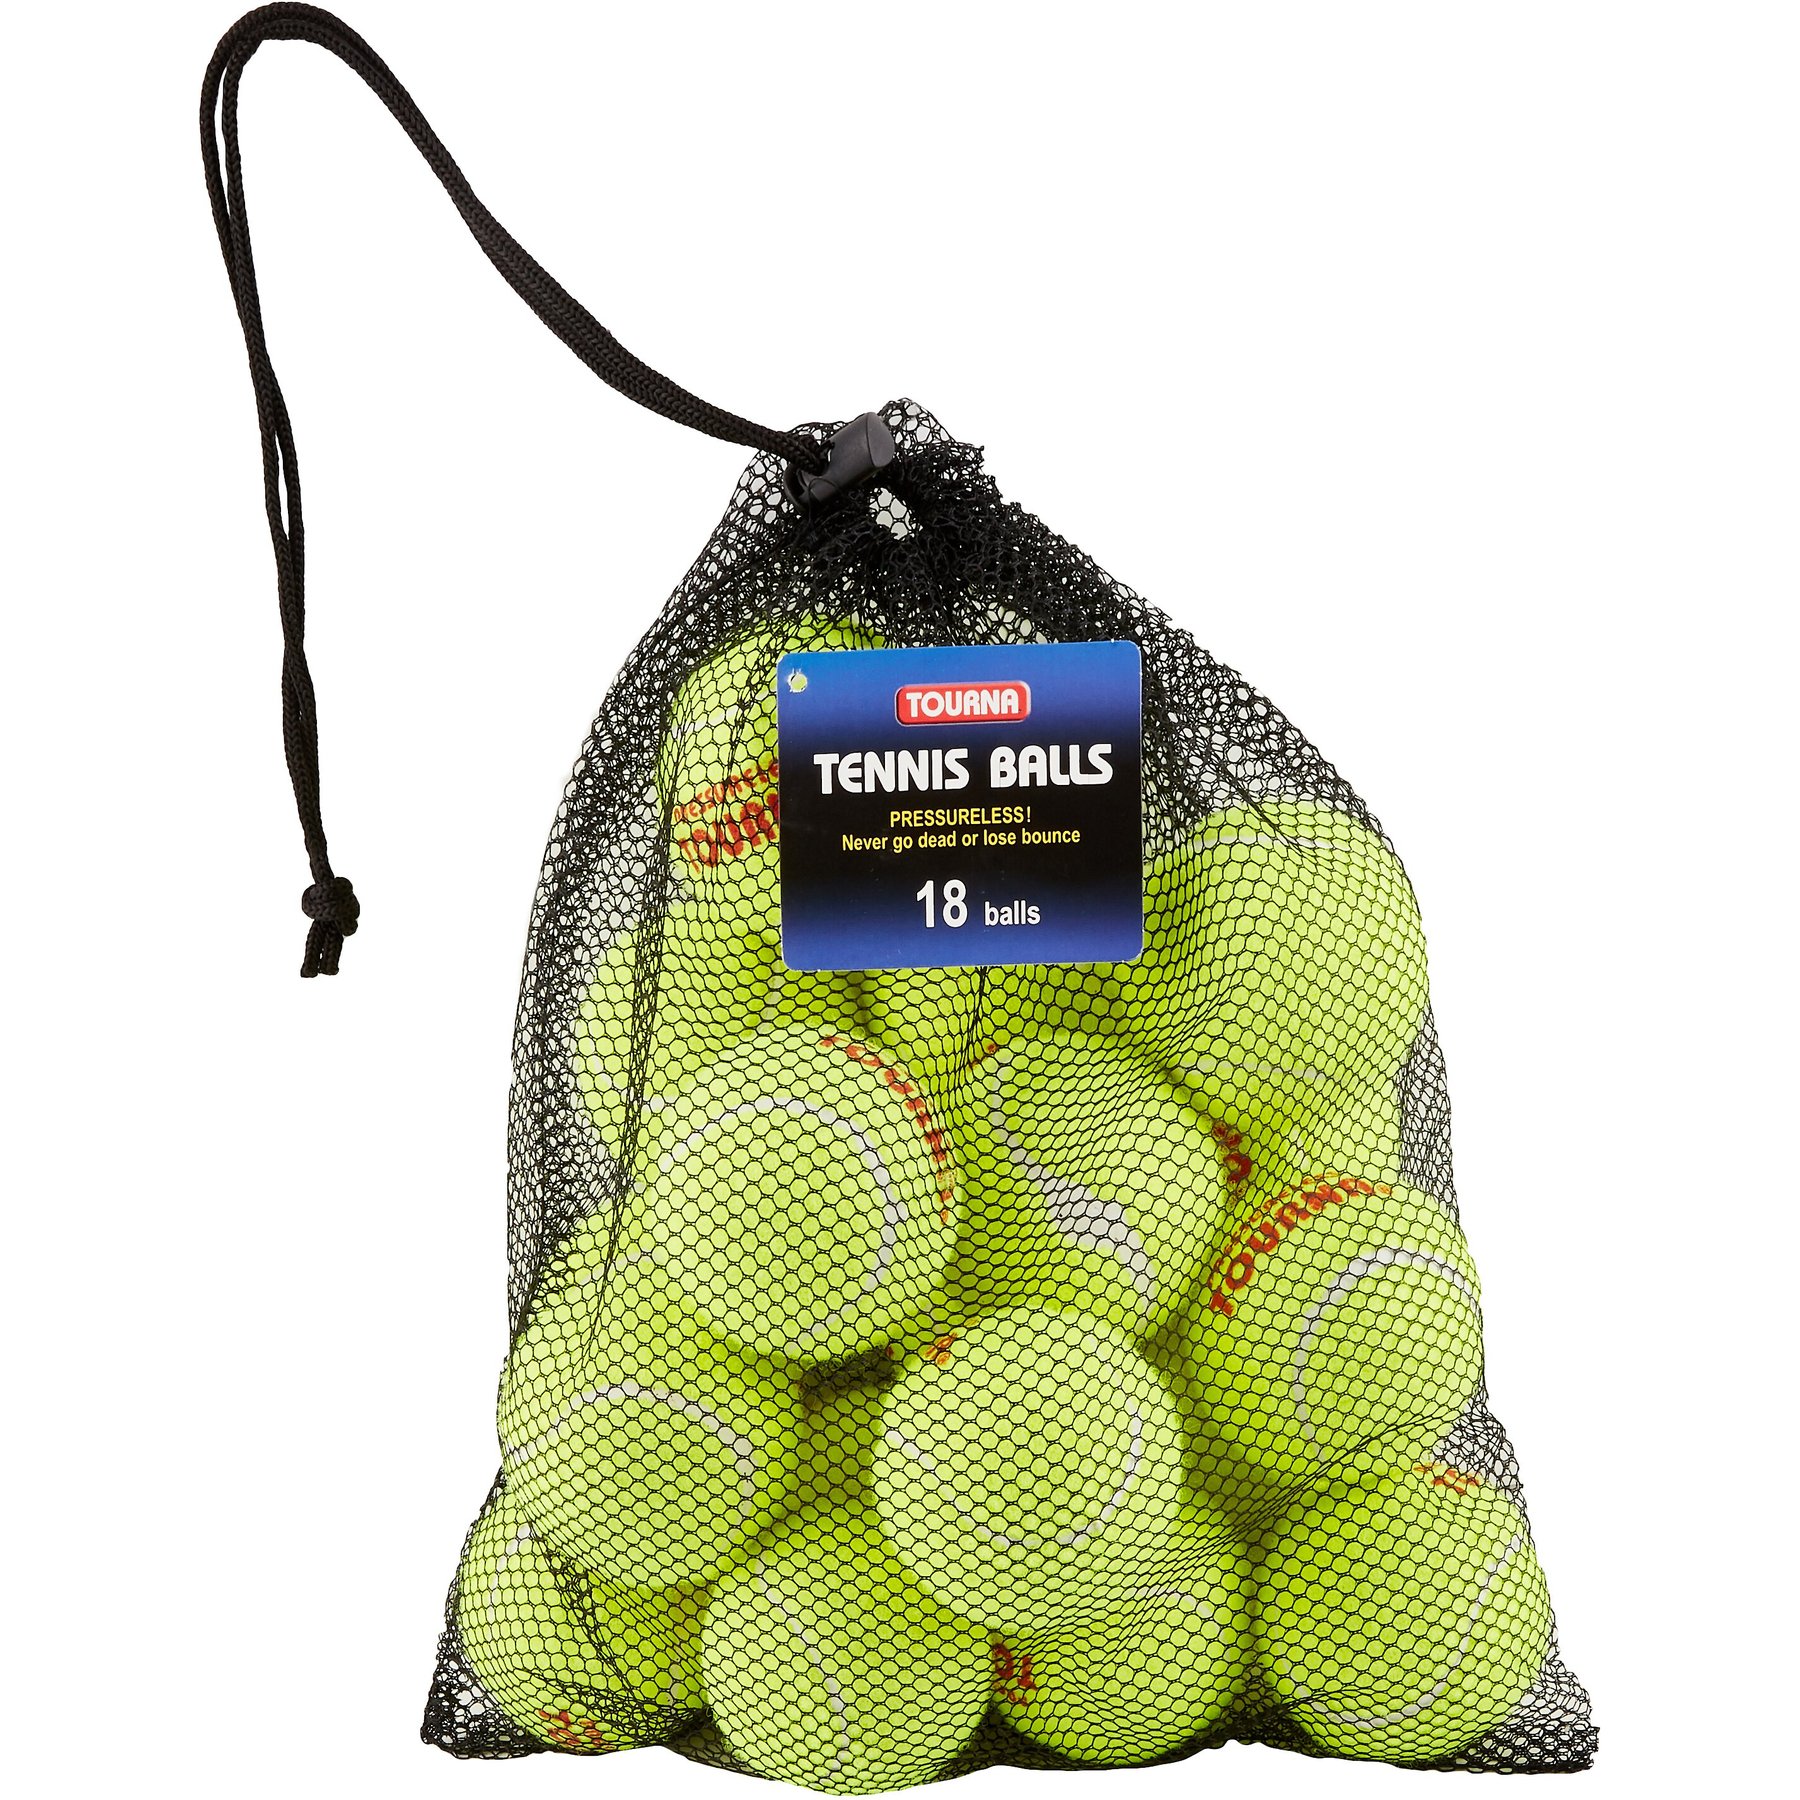 Color expert says tennis balls are neither green nor yellow